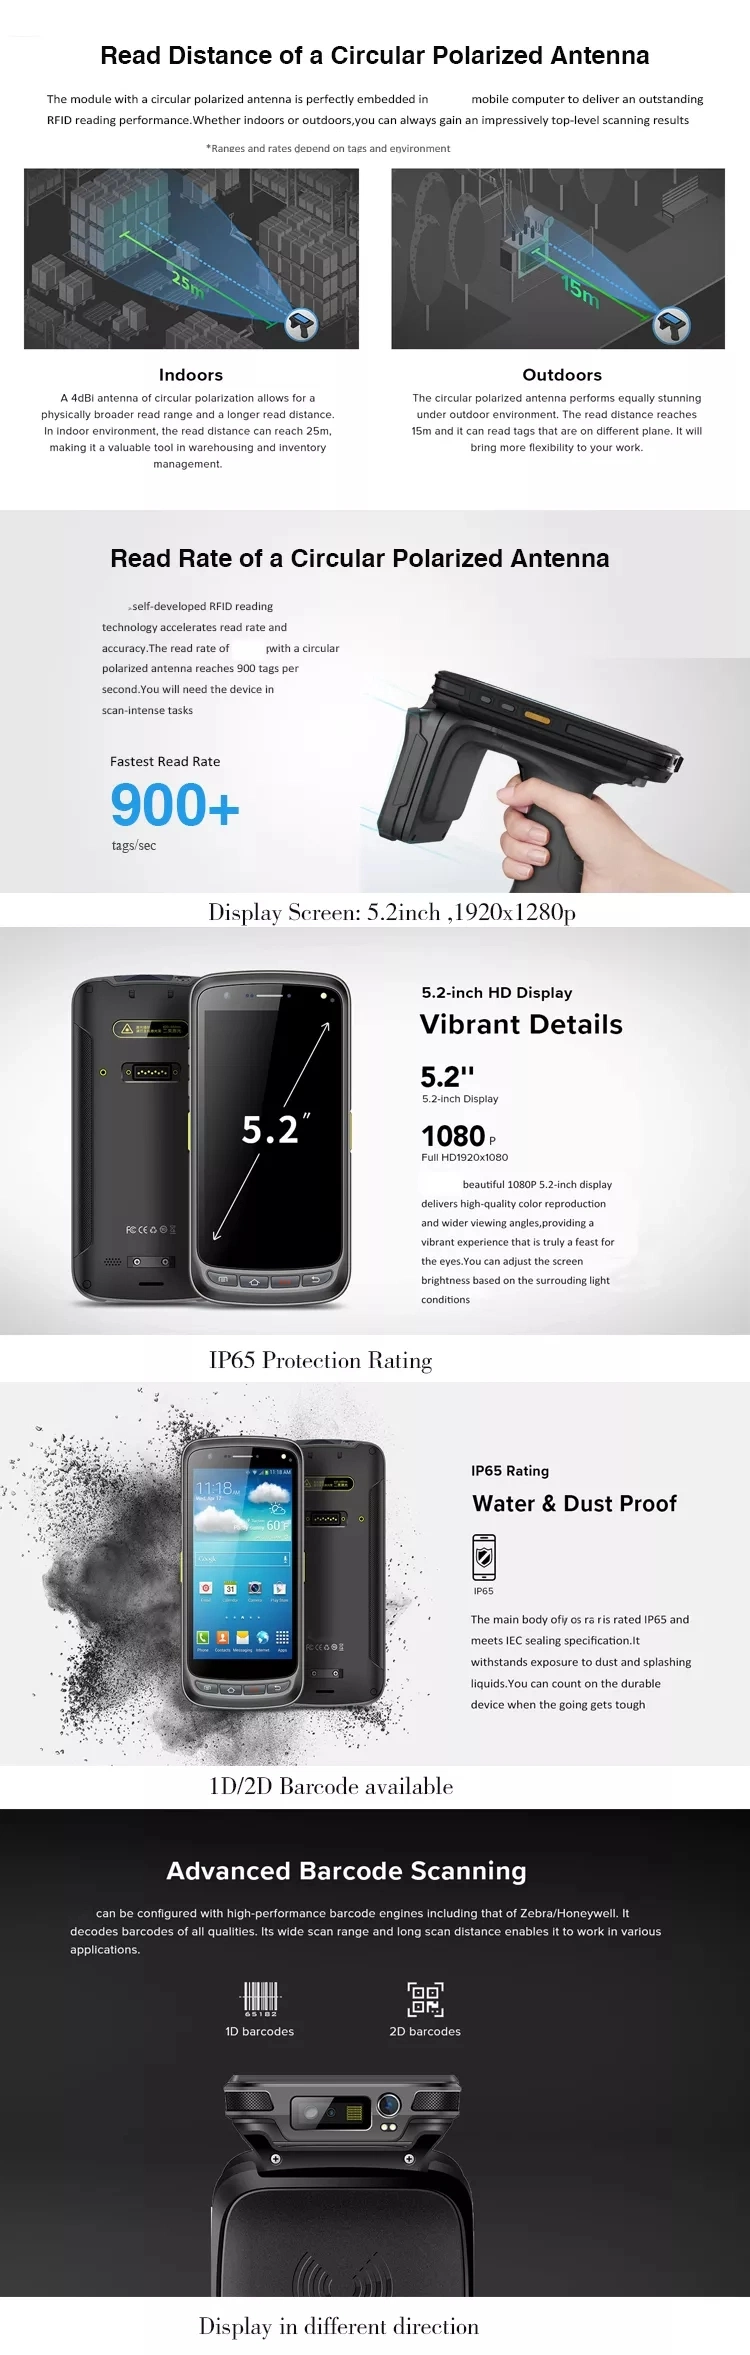 WiFi Barcode 4G Multi-Function Android UHF RFID PDA Wireless Handheld UHF RFID NFC Reader with Charing Base for Inventory Management